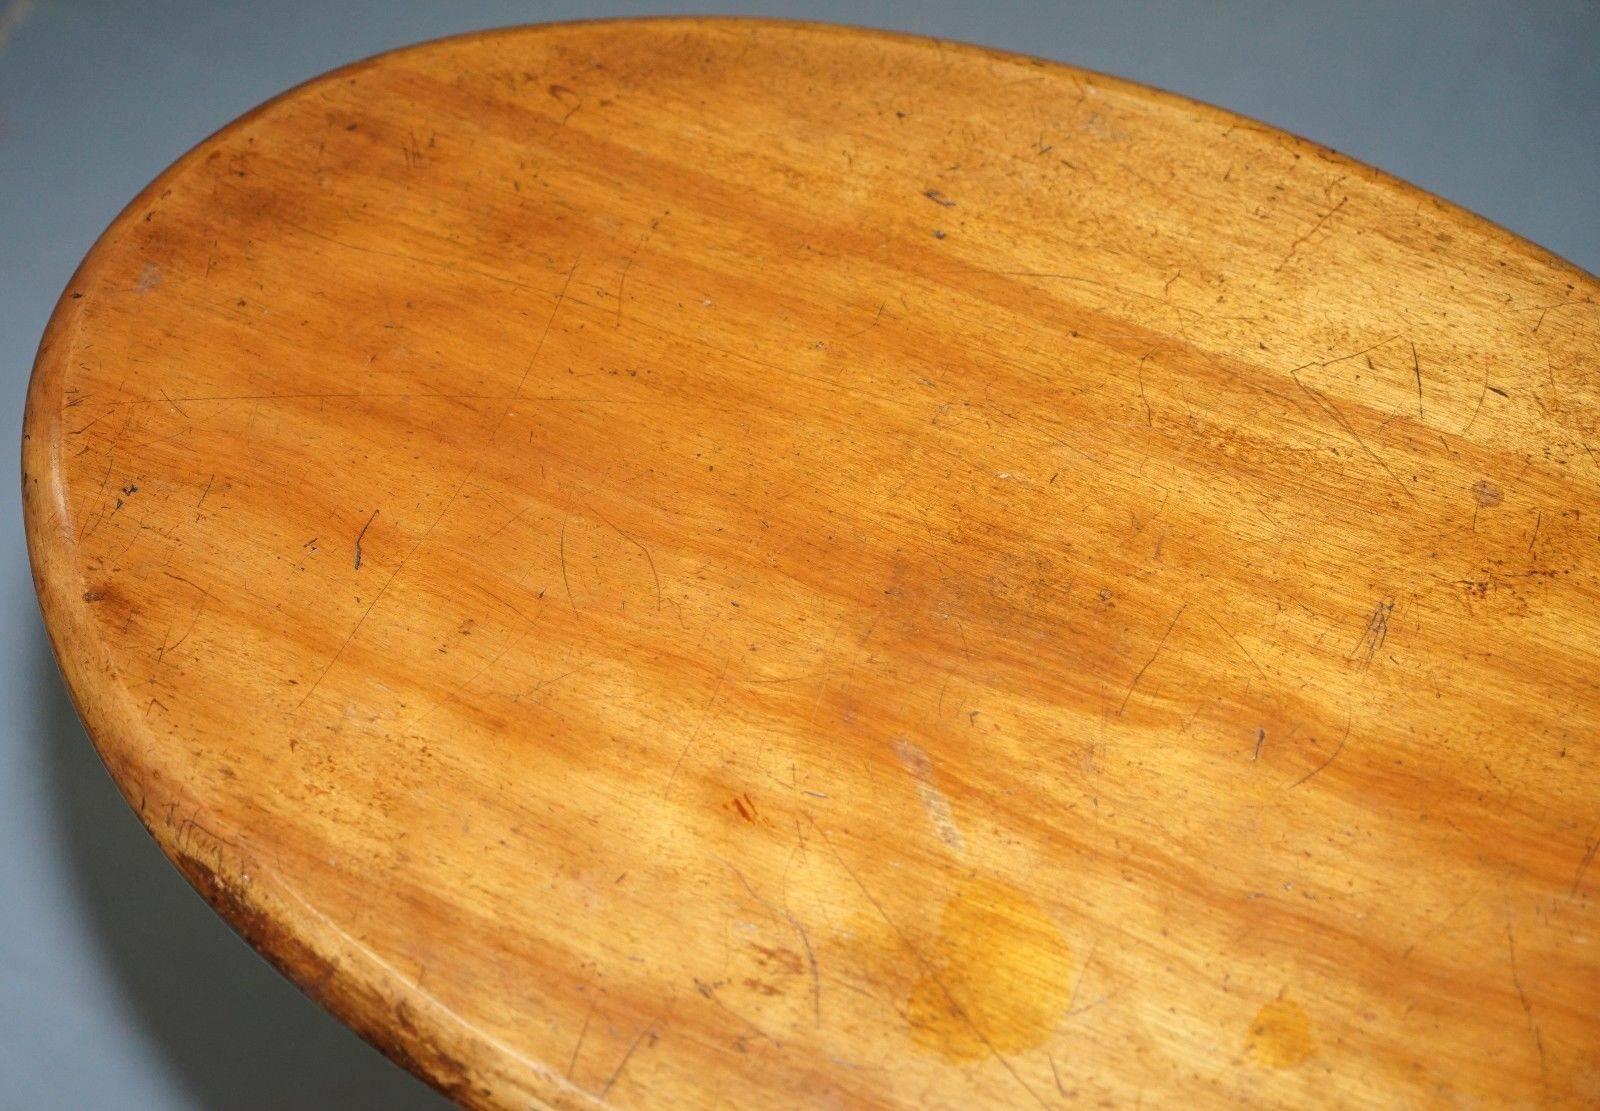 Hand-Carved Edwardian Fruit Wood Oval Side Table Lovely Vintage Condition Nice and Tall